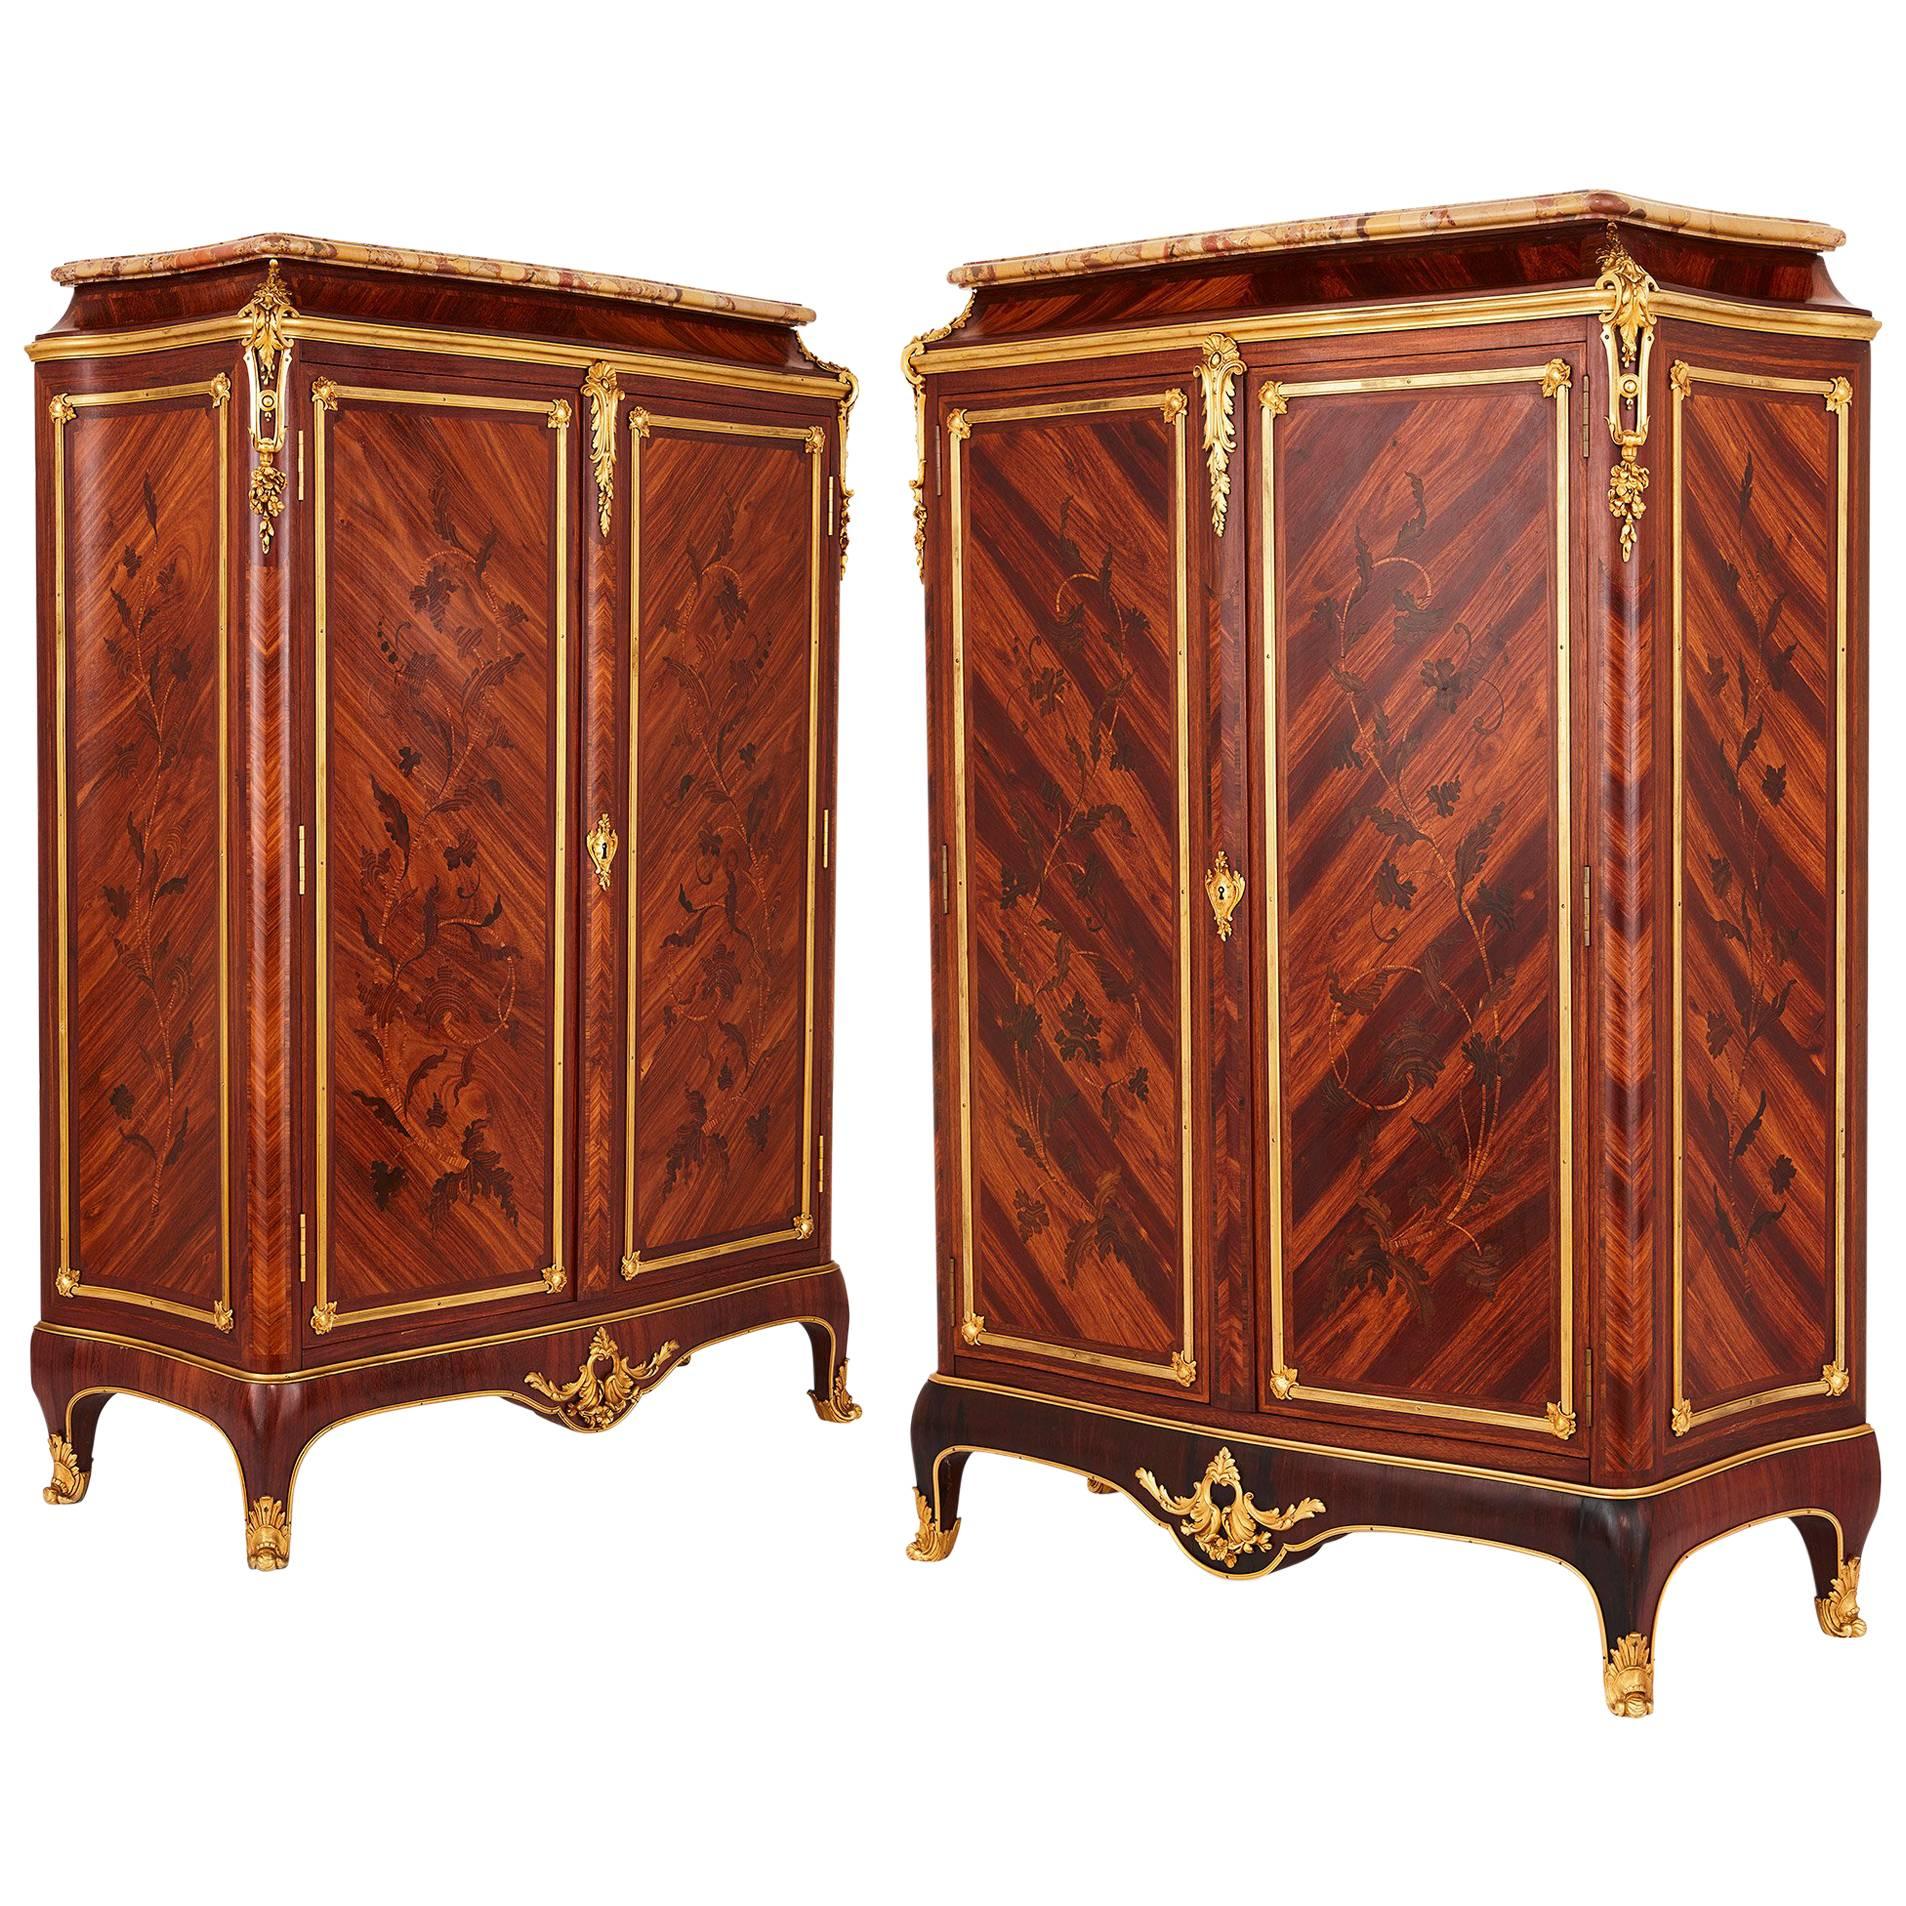 Pair of Gilt Bronze-Mounted Marquetry Cabinets by Durand